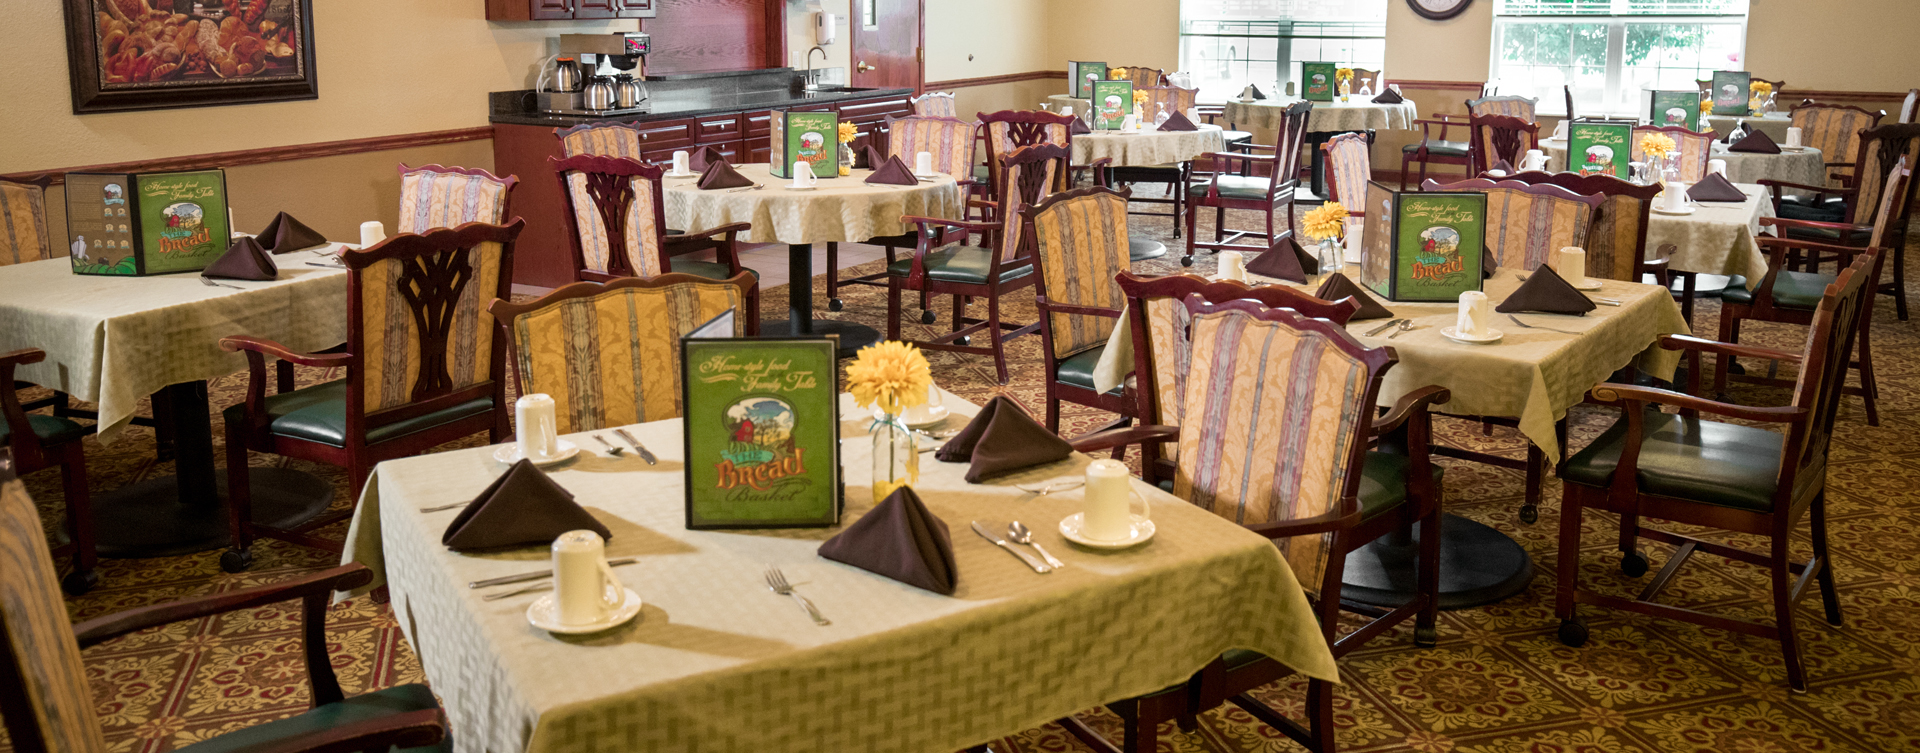 Enjoy restaurant -style meals served three times a day in our dining room at Bickford of Quincy